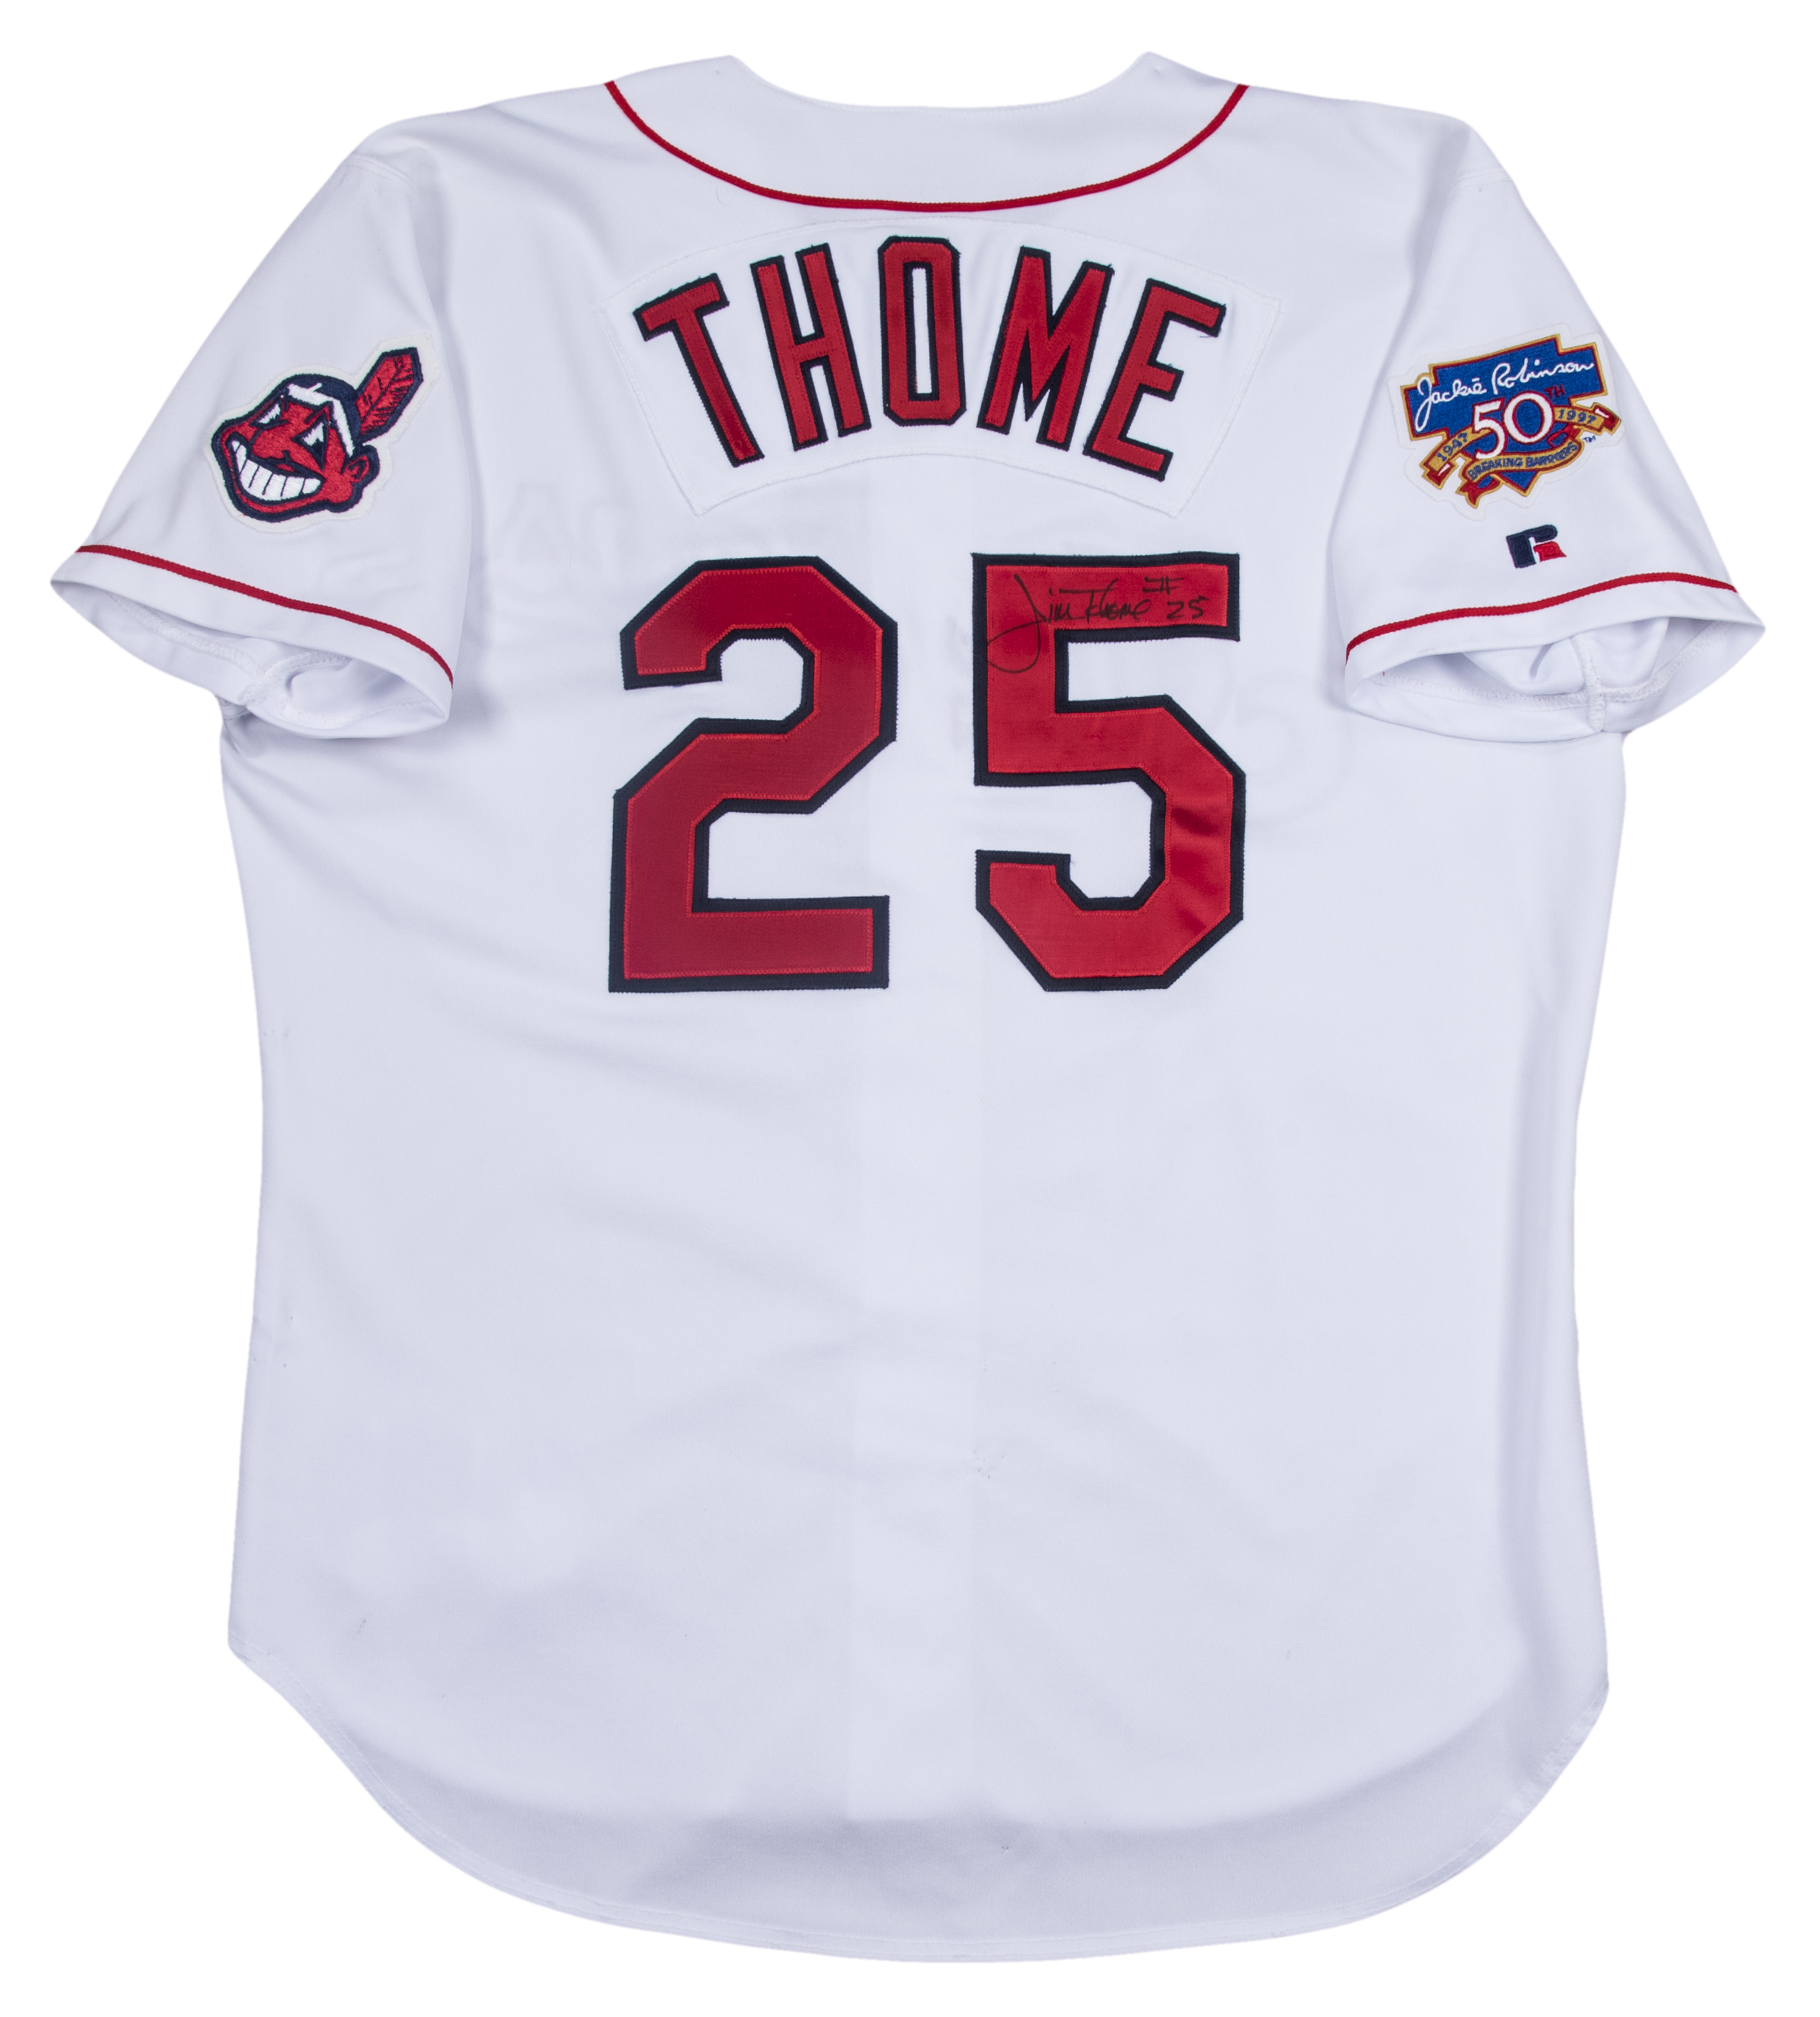 jim thome signed jersey